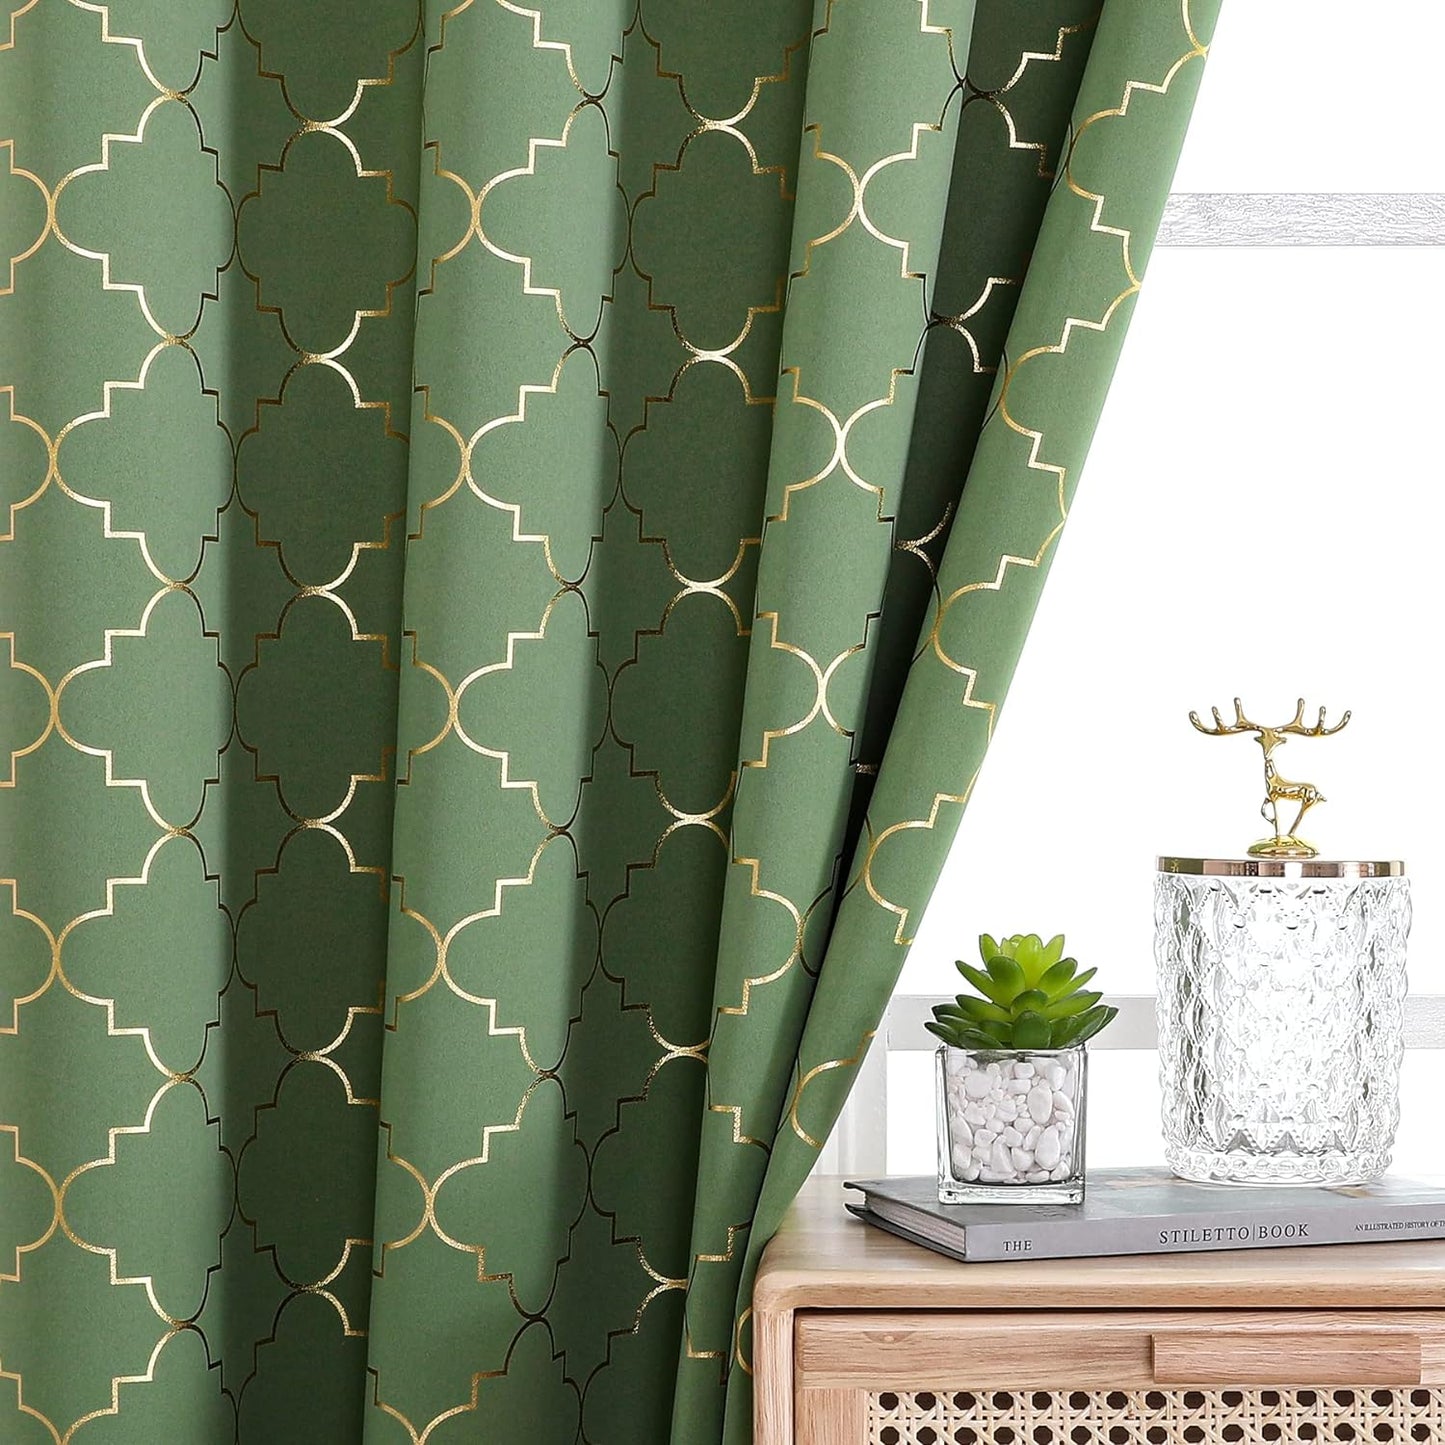 Enactex 100% Full Blackout Curtains 63 Inch Length Thermal Insulated Grey Curtain with Gold Geometric Metallic Pattern, Light Blocking Grommet Window Drapes for Living Room Bedroom, 2 Panels  Enactex Green/Gold W52" X L84" X2 